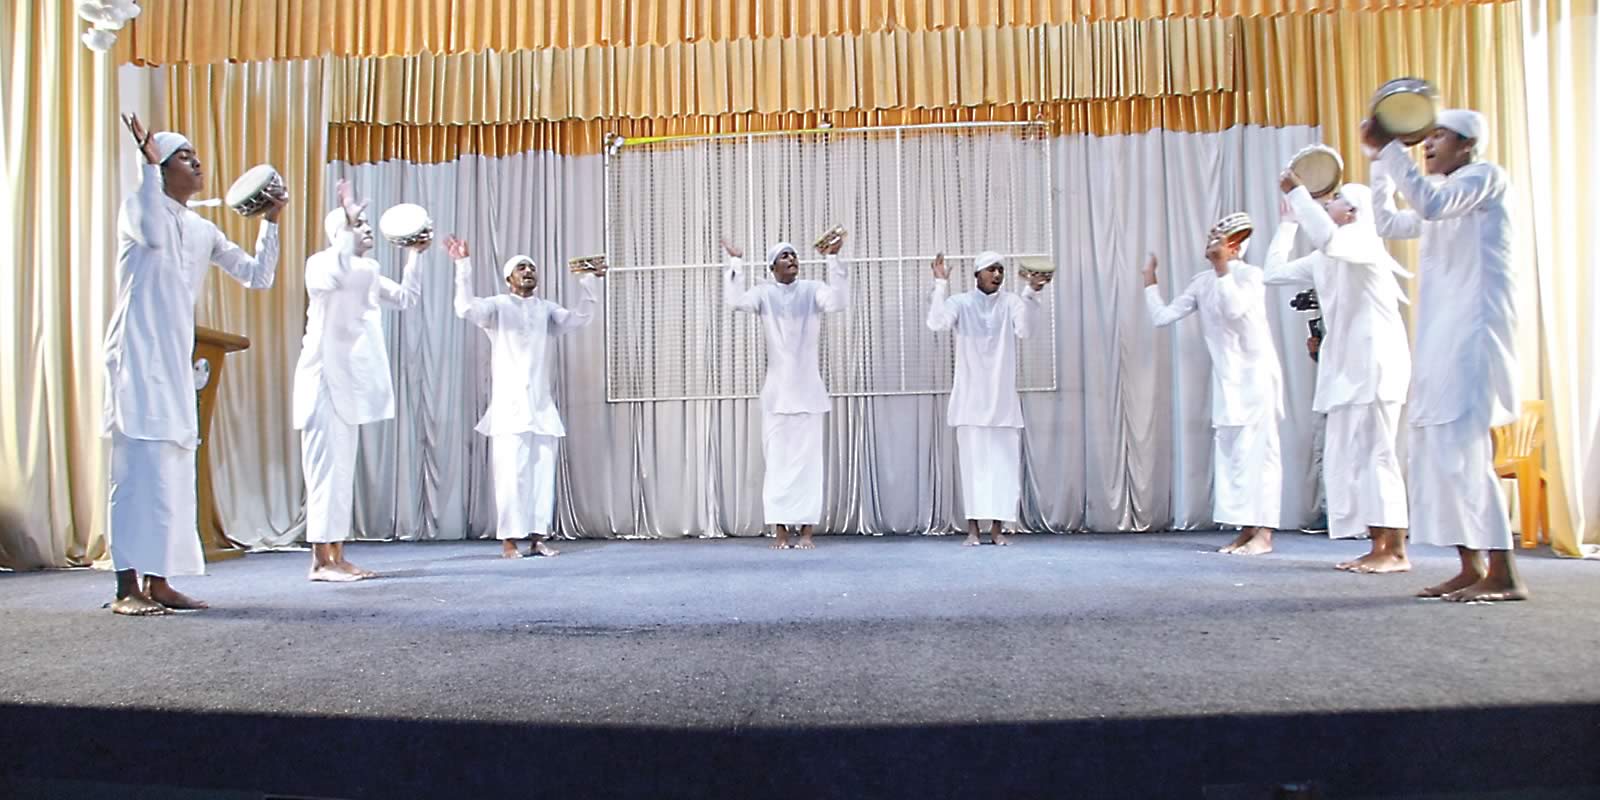 On stage in the town of Tirurangadi performers present a duff muttu, a devotional genre that celebrates God and the Prophet Muhammad, using voices and hand-held drums. 